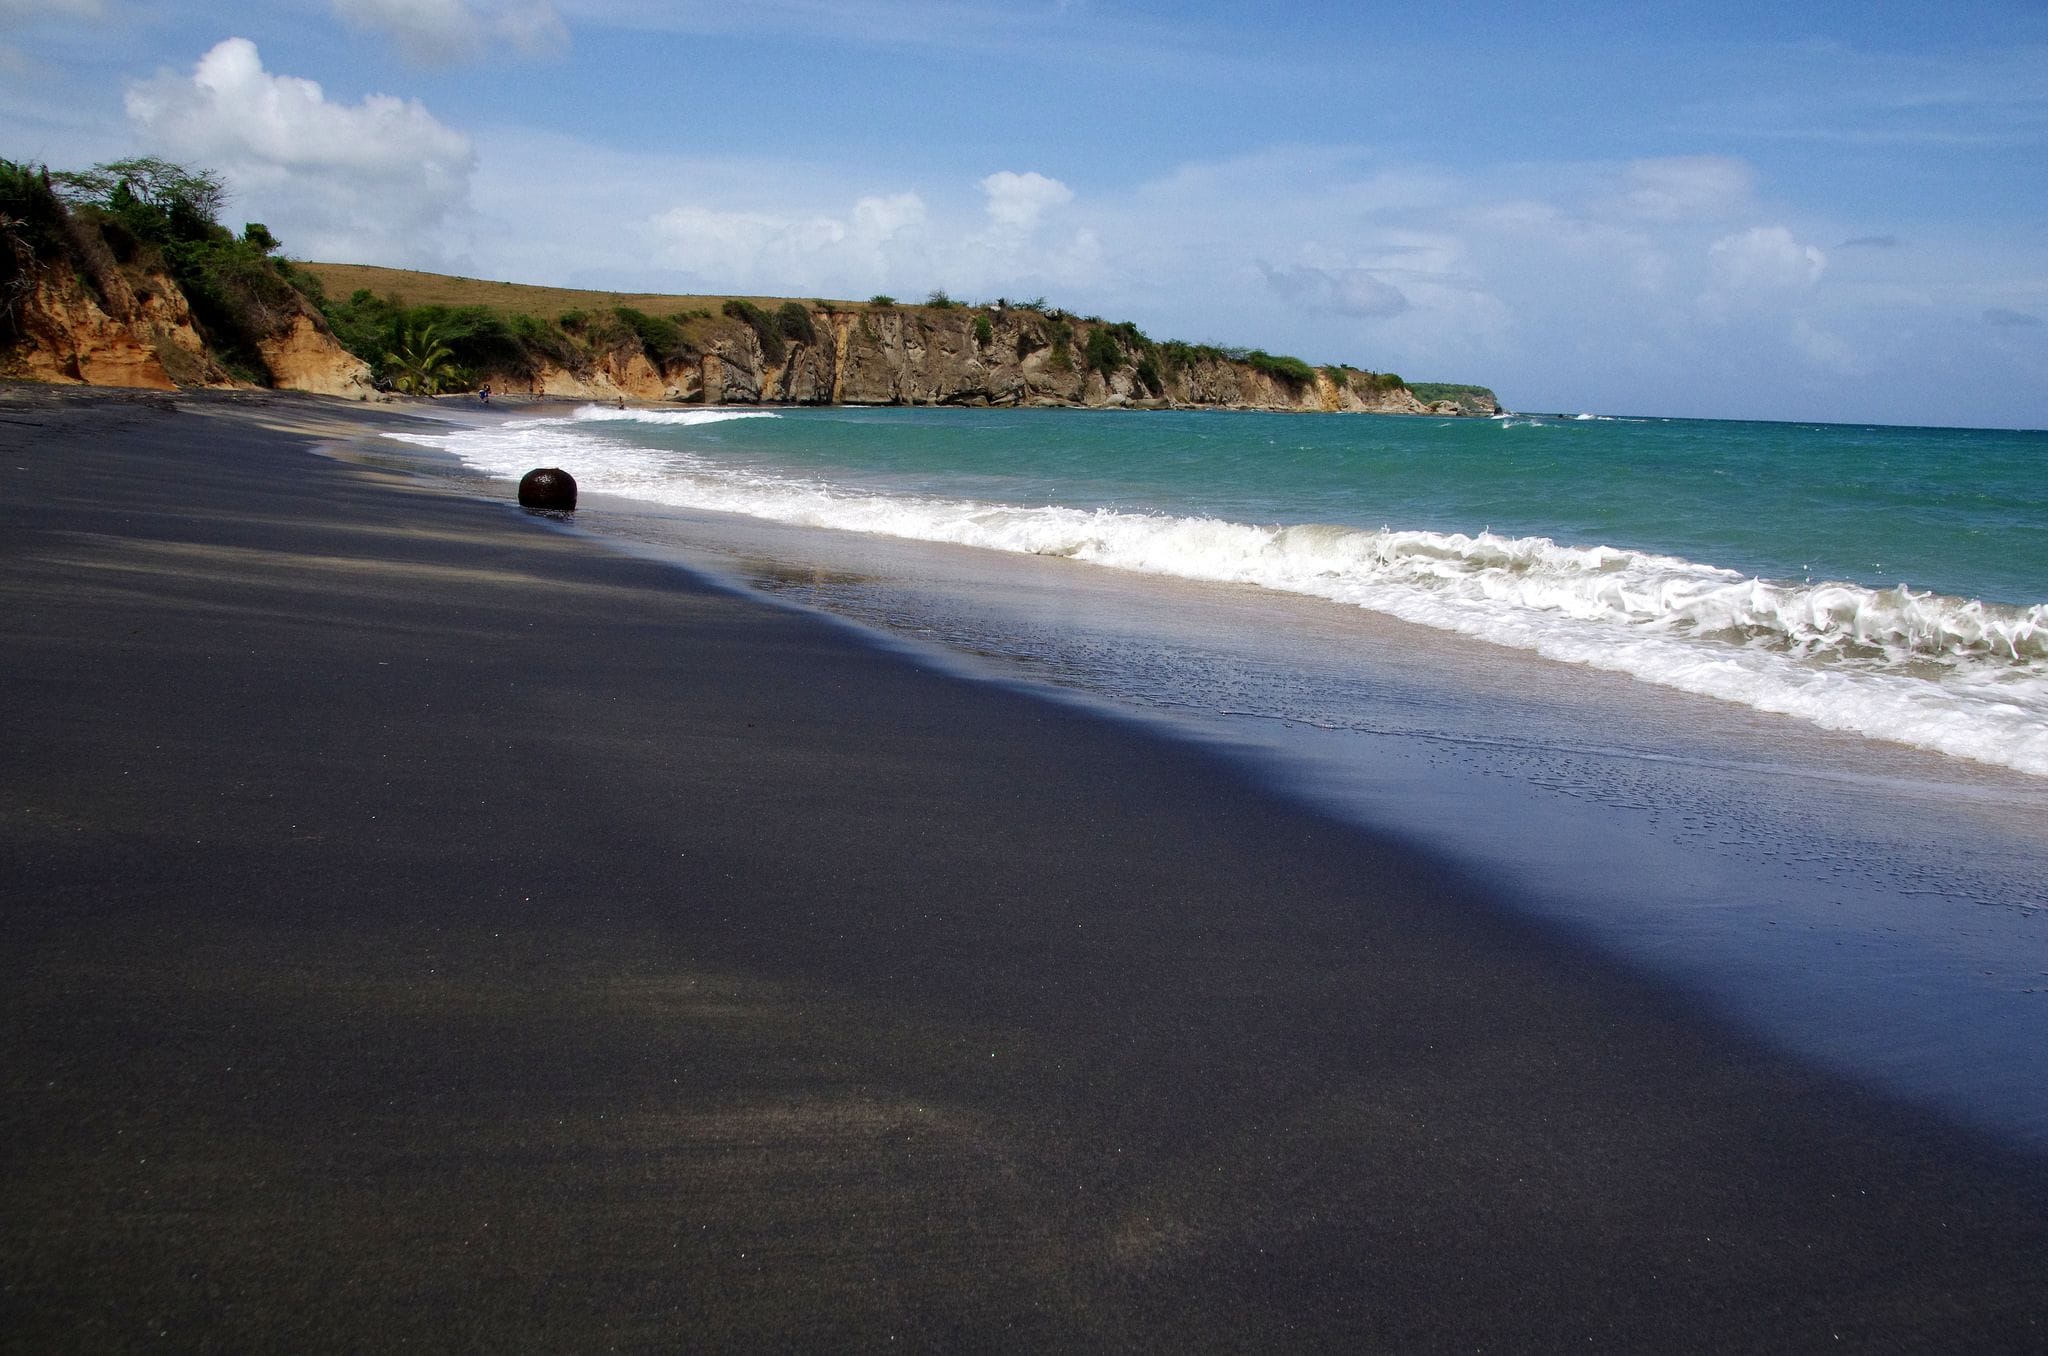 Playa Negra, Vieques: An Out of Place Black Sand Beach